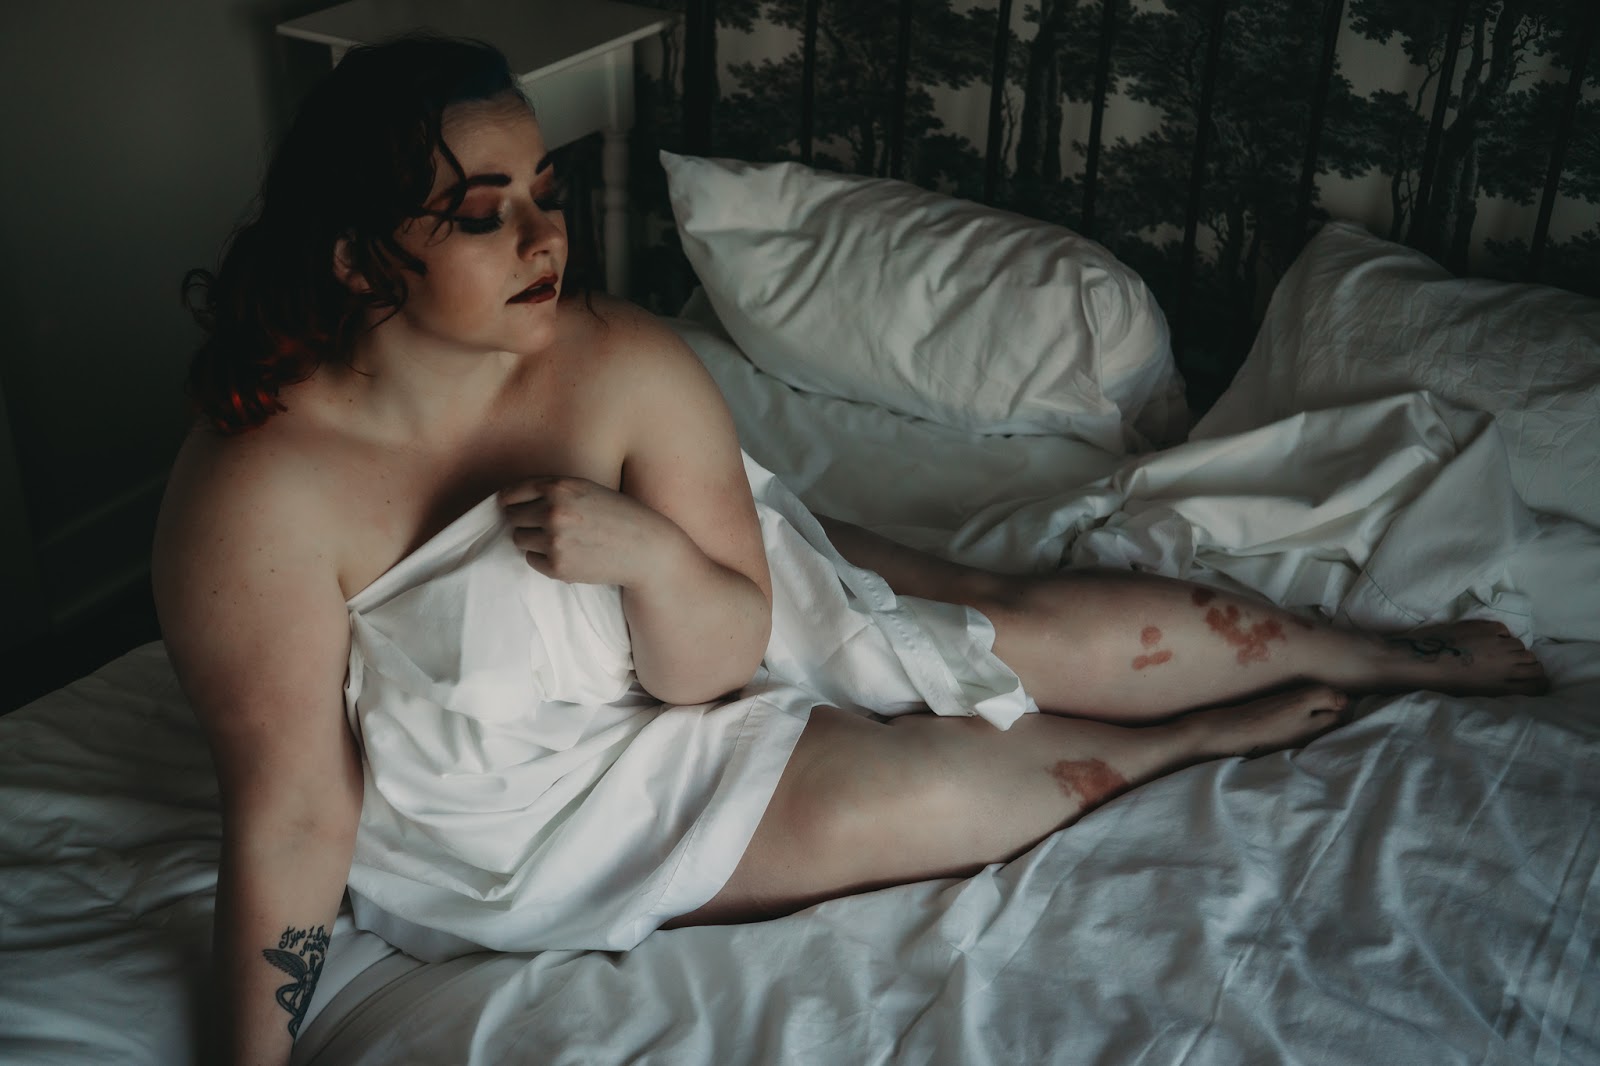 Woman covering her naked body with white blanket, Photo by Embodied Art Boudoir. Classic boudoir photography, classic photography, classic boudoir, classy boudoir, classy photography, sensual photography, sensual boudoir, colorado boudoir, denver boudoir, boulder boudoir, colorado springs boudoir, boudoir ideas, boudoir poses, boudoir inspiration, photography inspiration, romantic boudoir, bridal boudoir